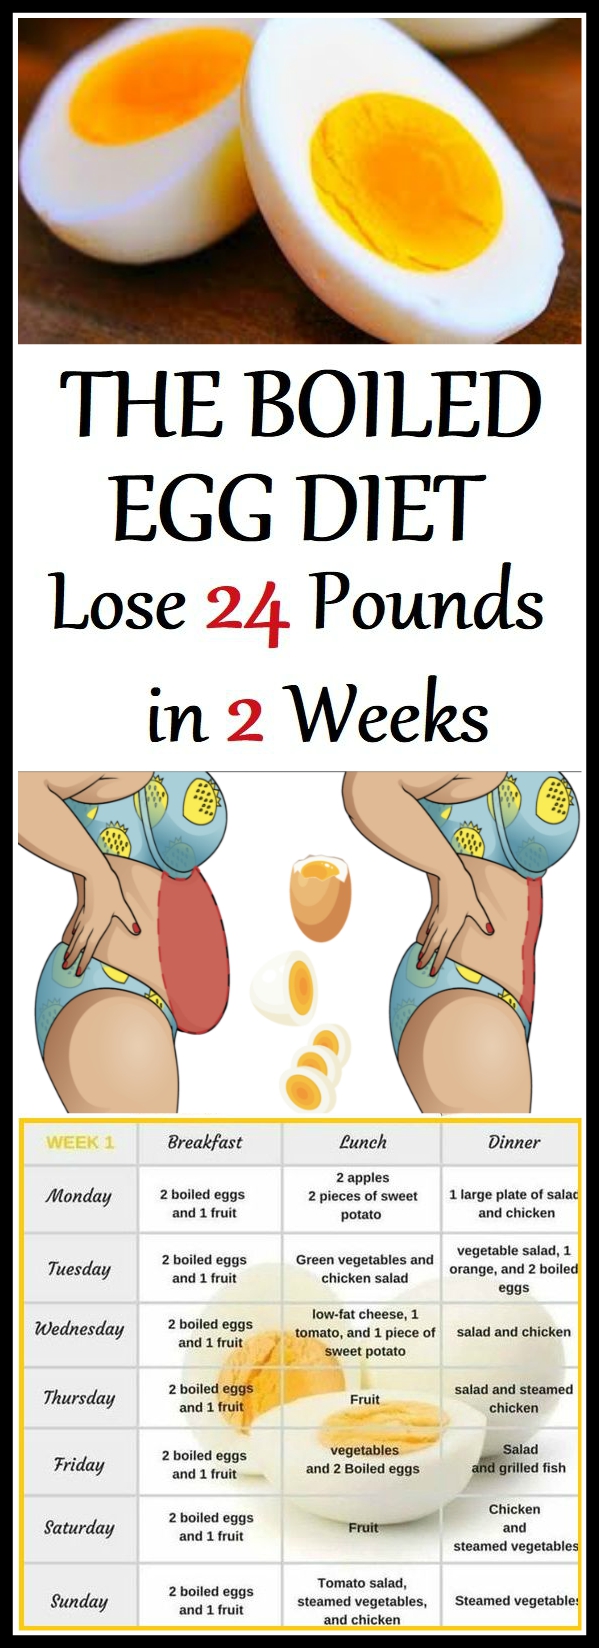 The Boiled Egg Diet Lose 24 Pounds in 2 Weeks